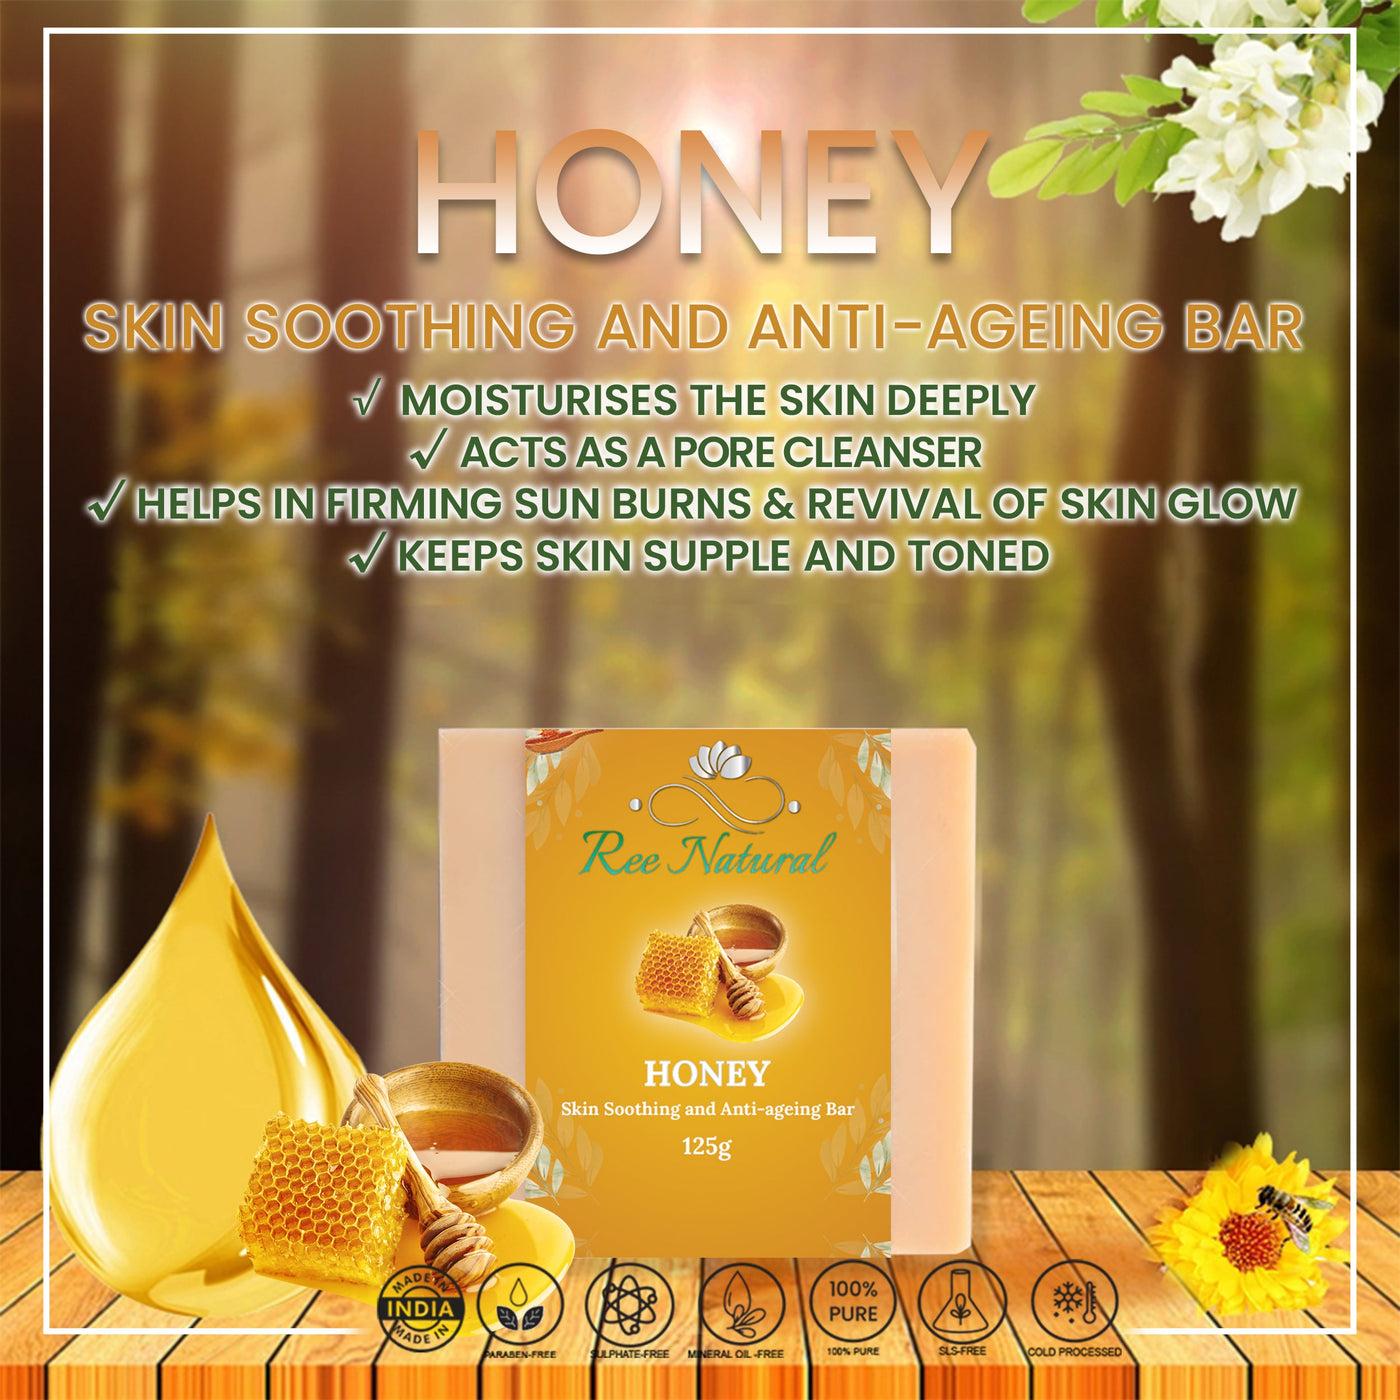 Women's Honey Skin Soothing And Anti-Ageing Bar - Ree Natural